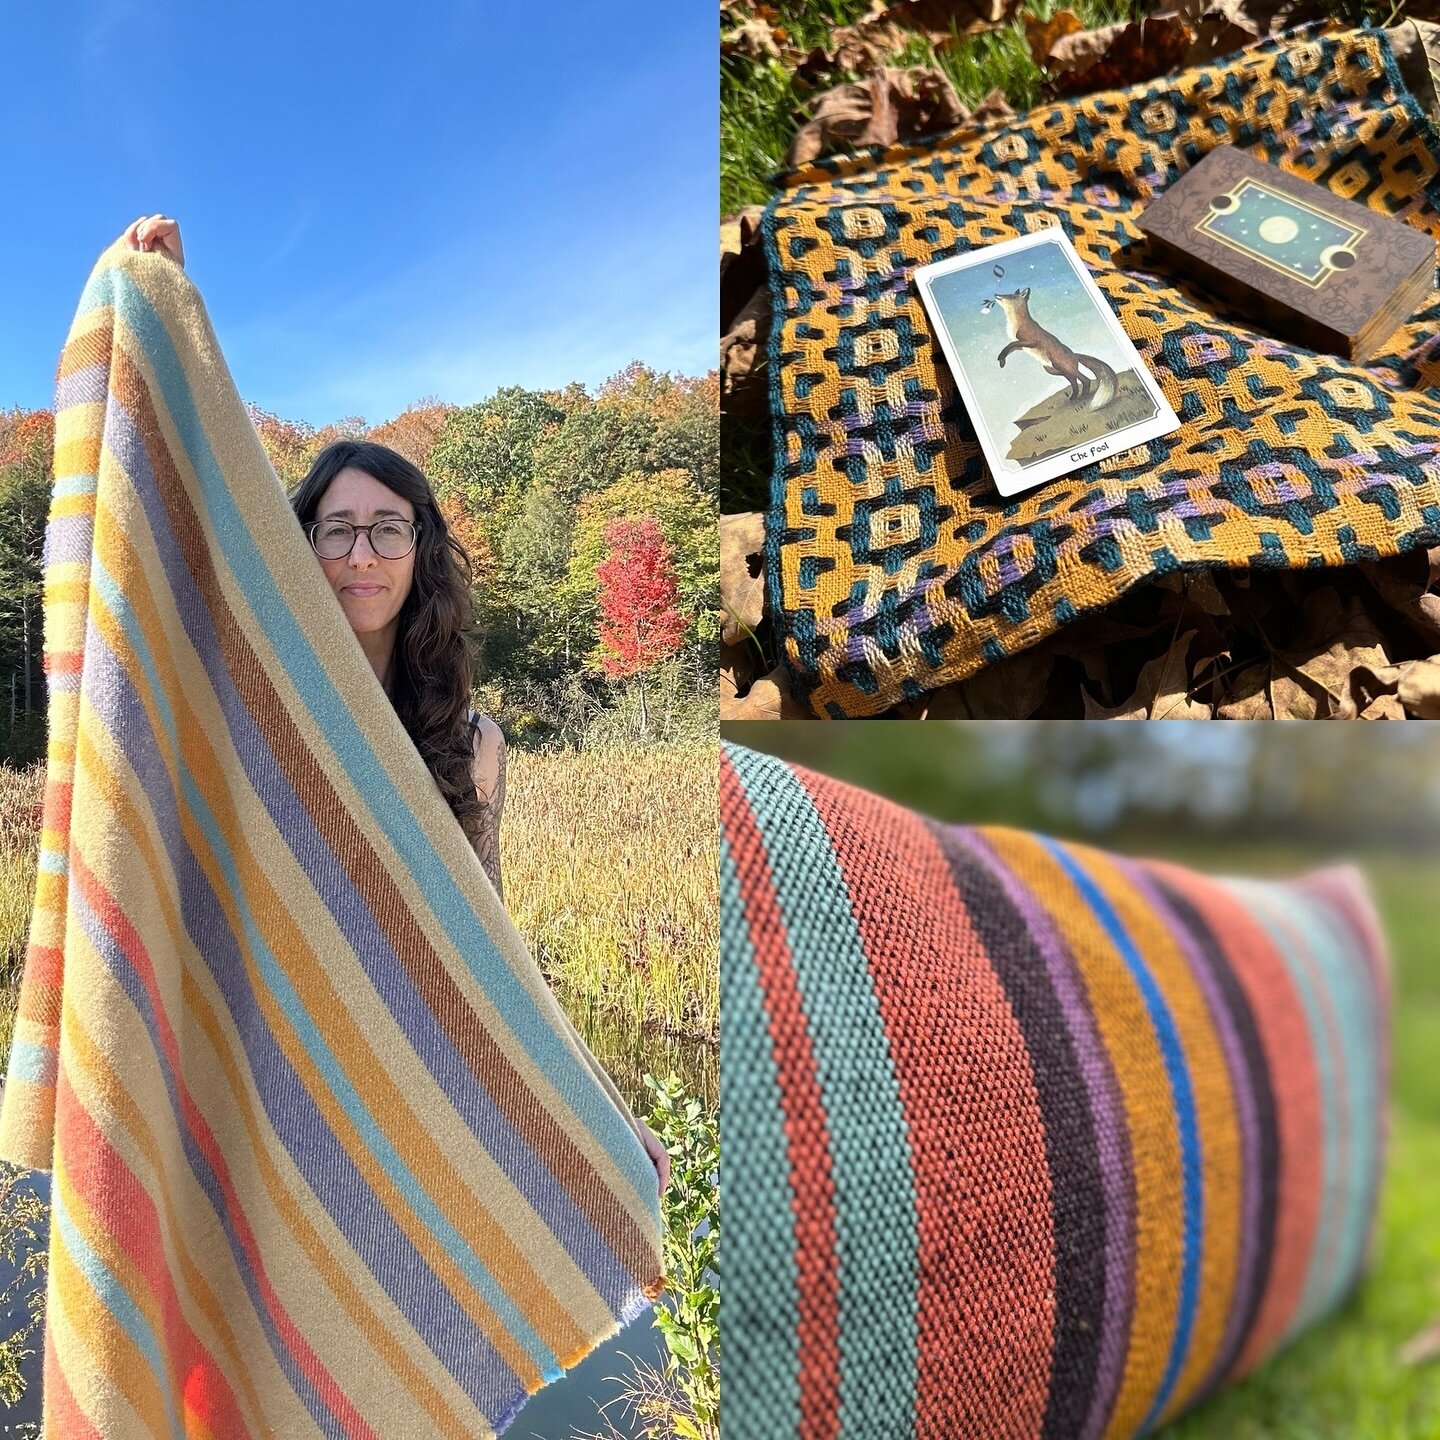 Handwoven NEW YEARS SALE through the 1st of the year!

This year I wove and wove and wove and I gotta say, it was life changing for me. I stepped into a kind of weaving practice I never have before. Not just of fabrics, but a deeper exploration into 